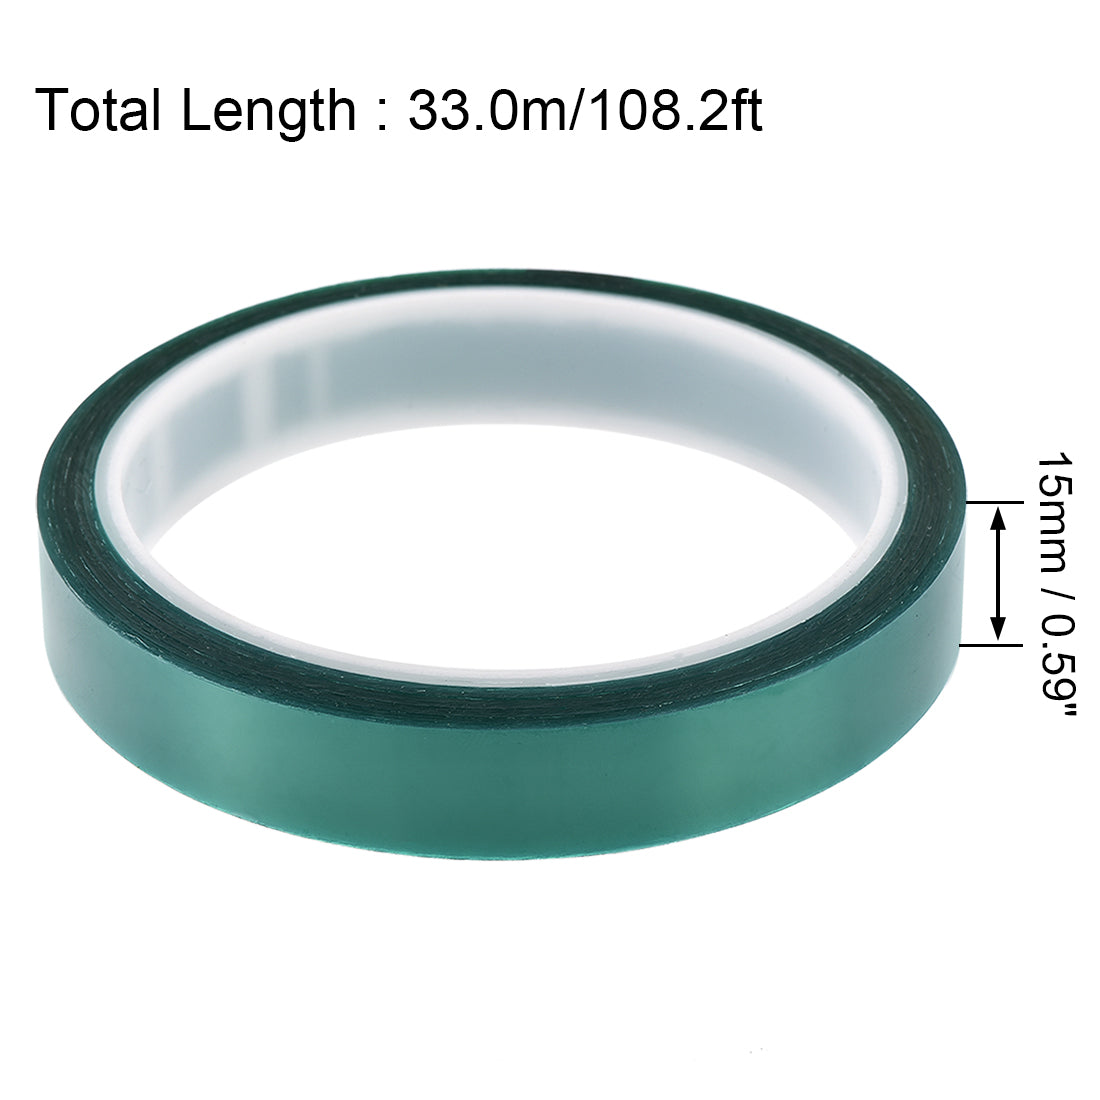 uxcell Uxcell 15mm PET Tape Green High Temperature Tape 33.0m/108.2ft